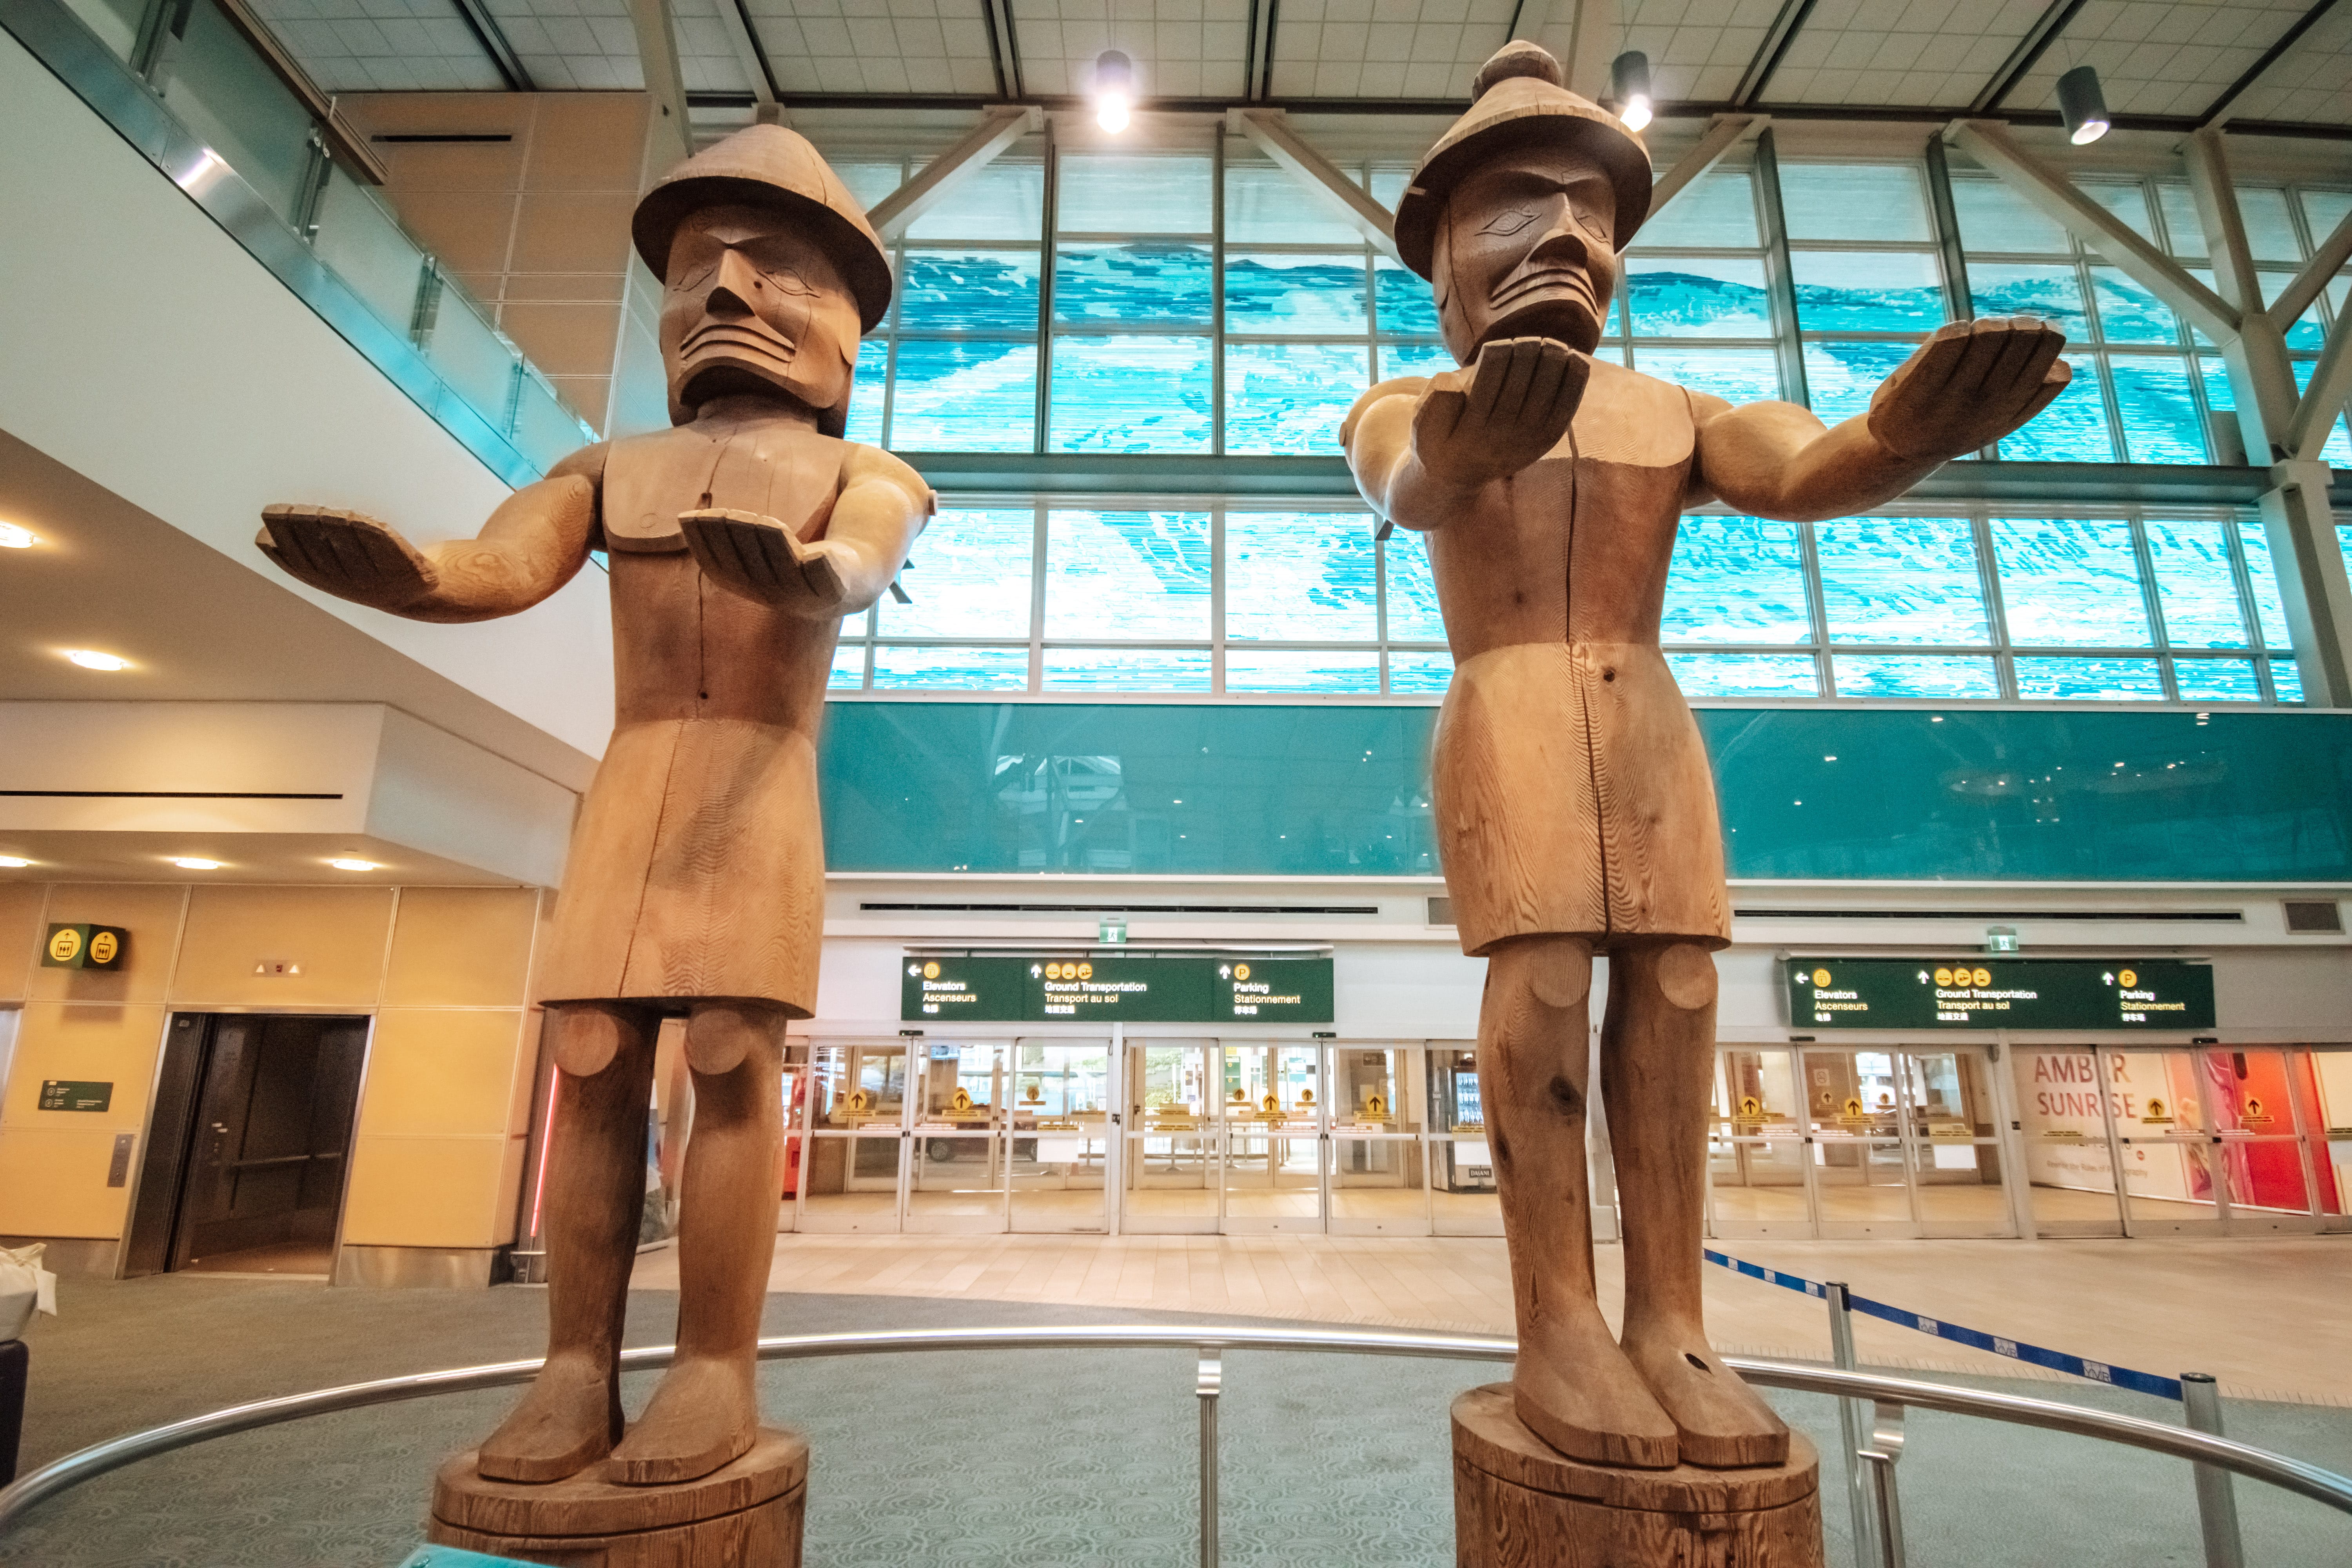 Welcome Figures by Joe David, 1986, at the Vancouver International Airport.